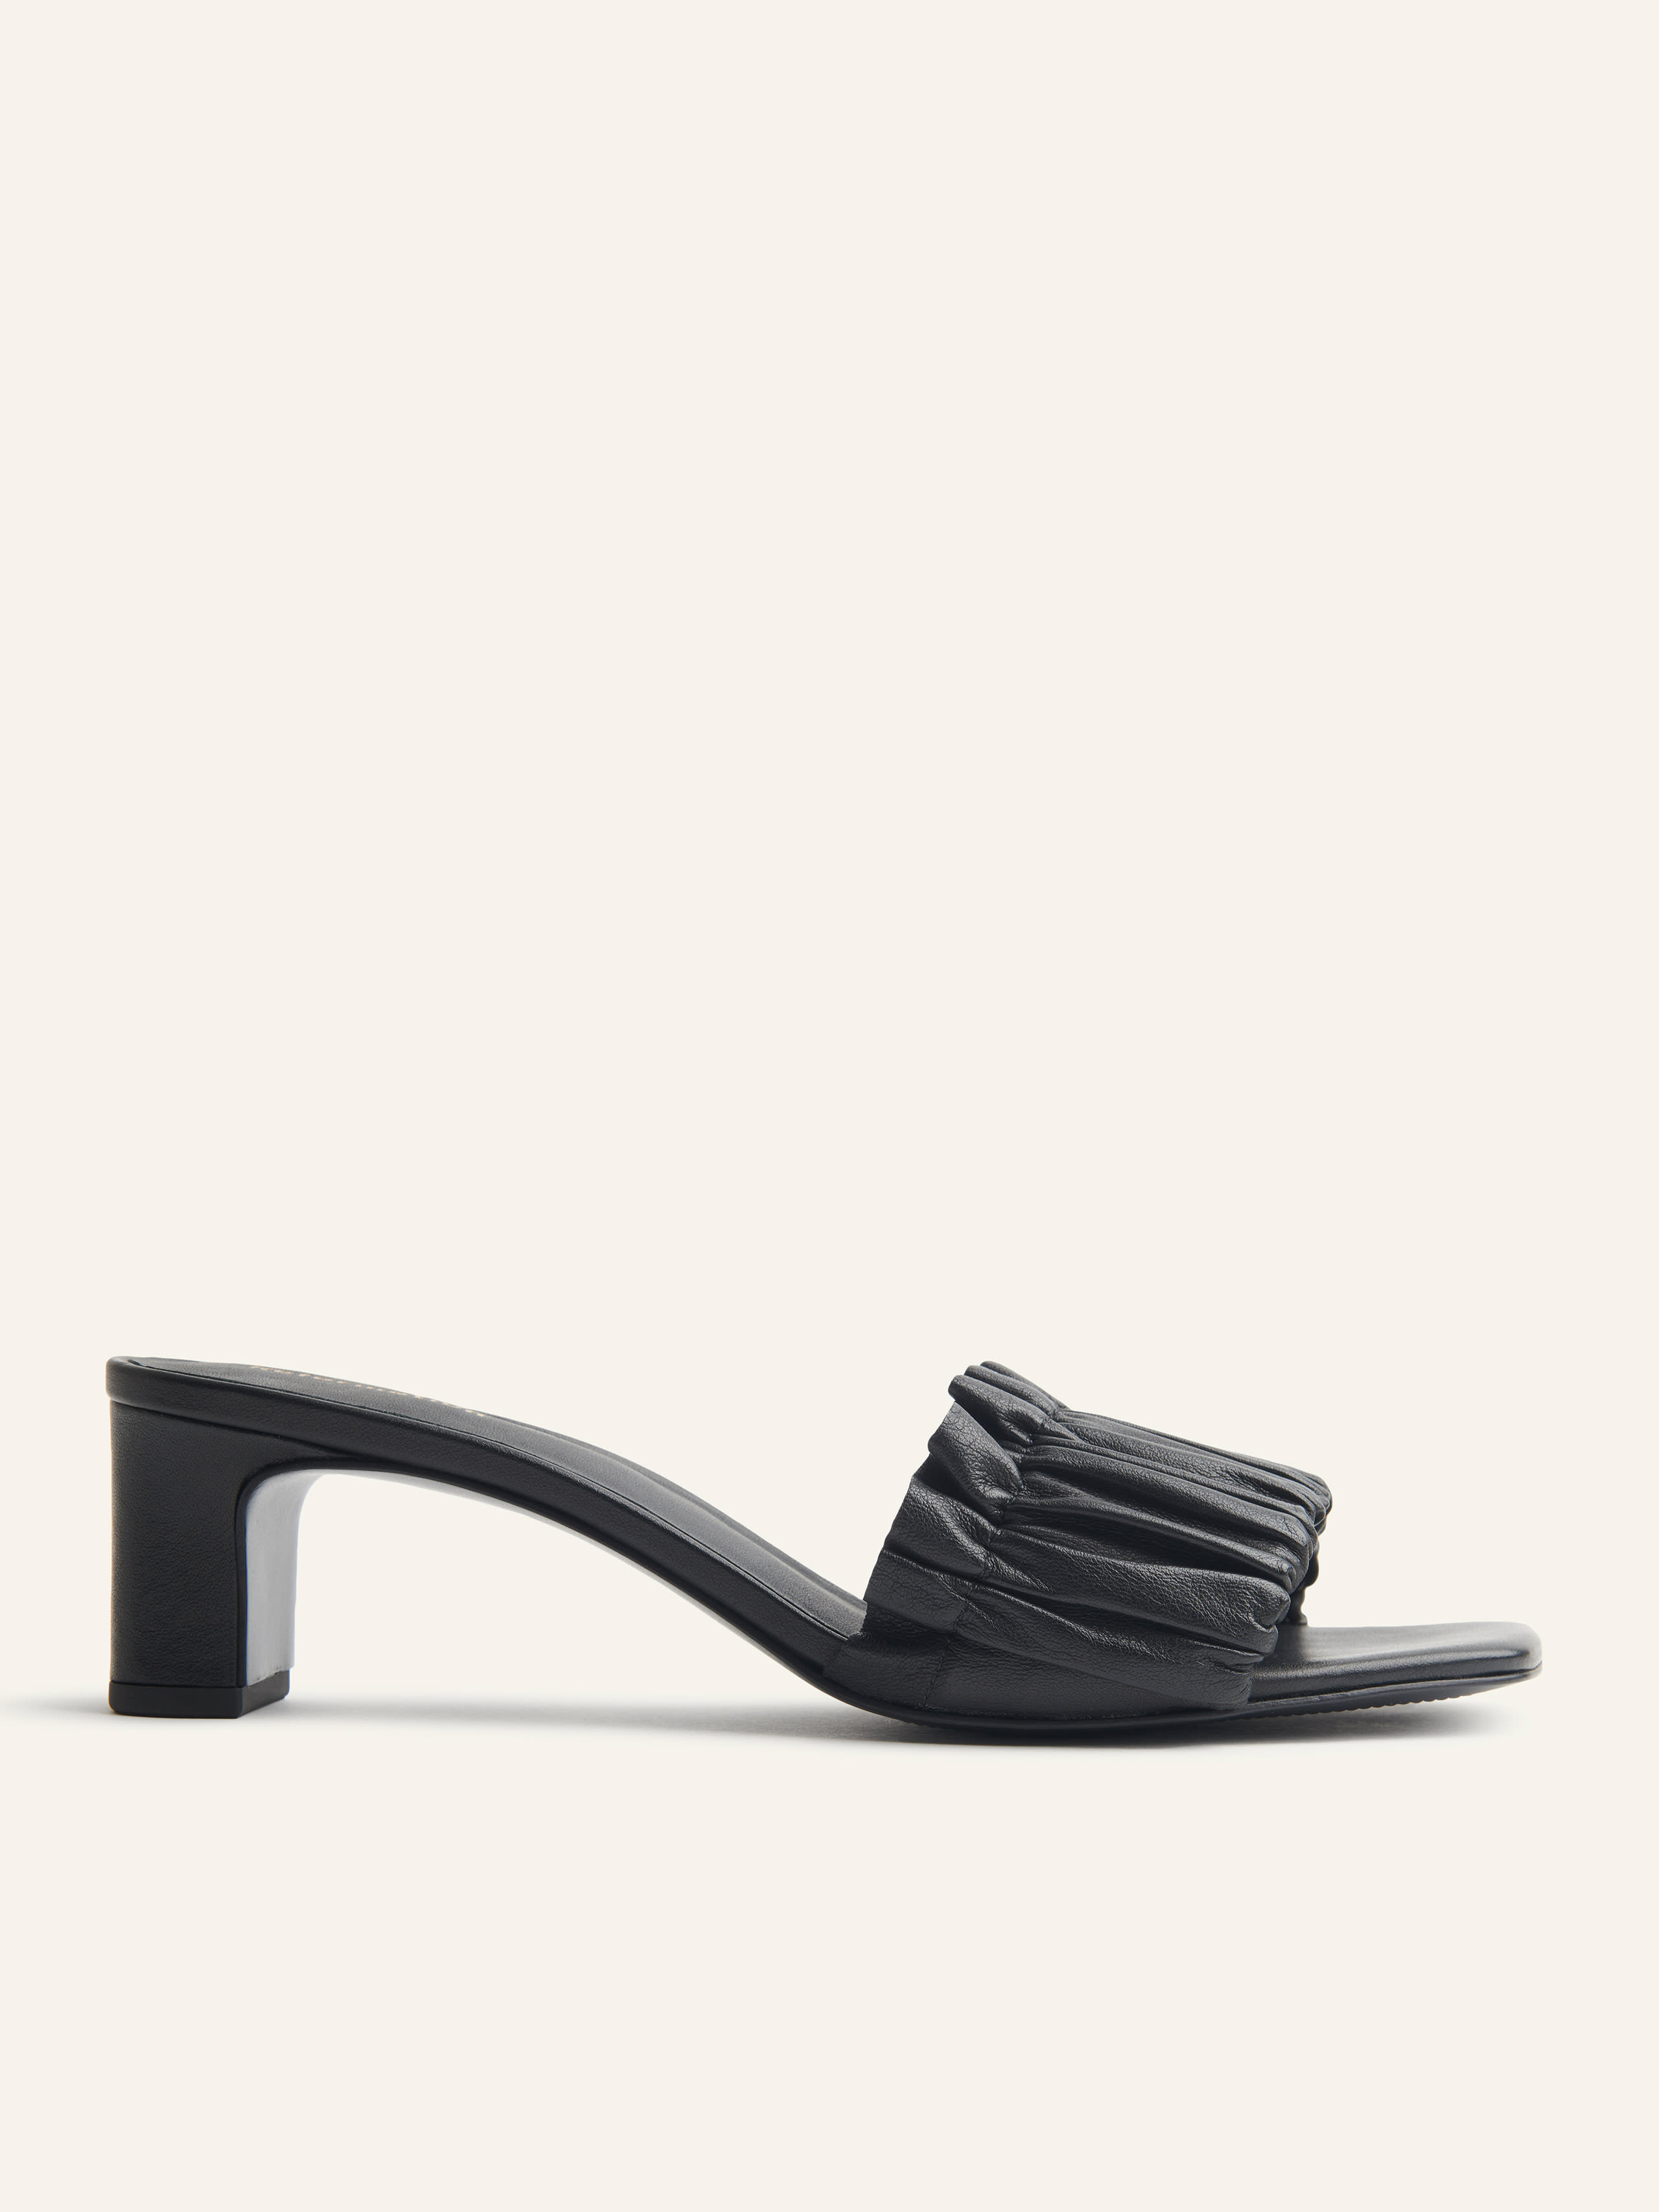 REFORMATION SHEREEN RUCHED BLOCK HEEL MULE